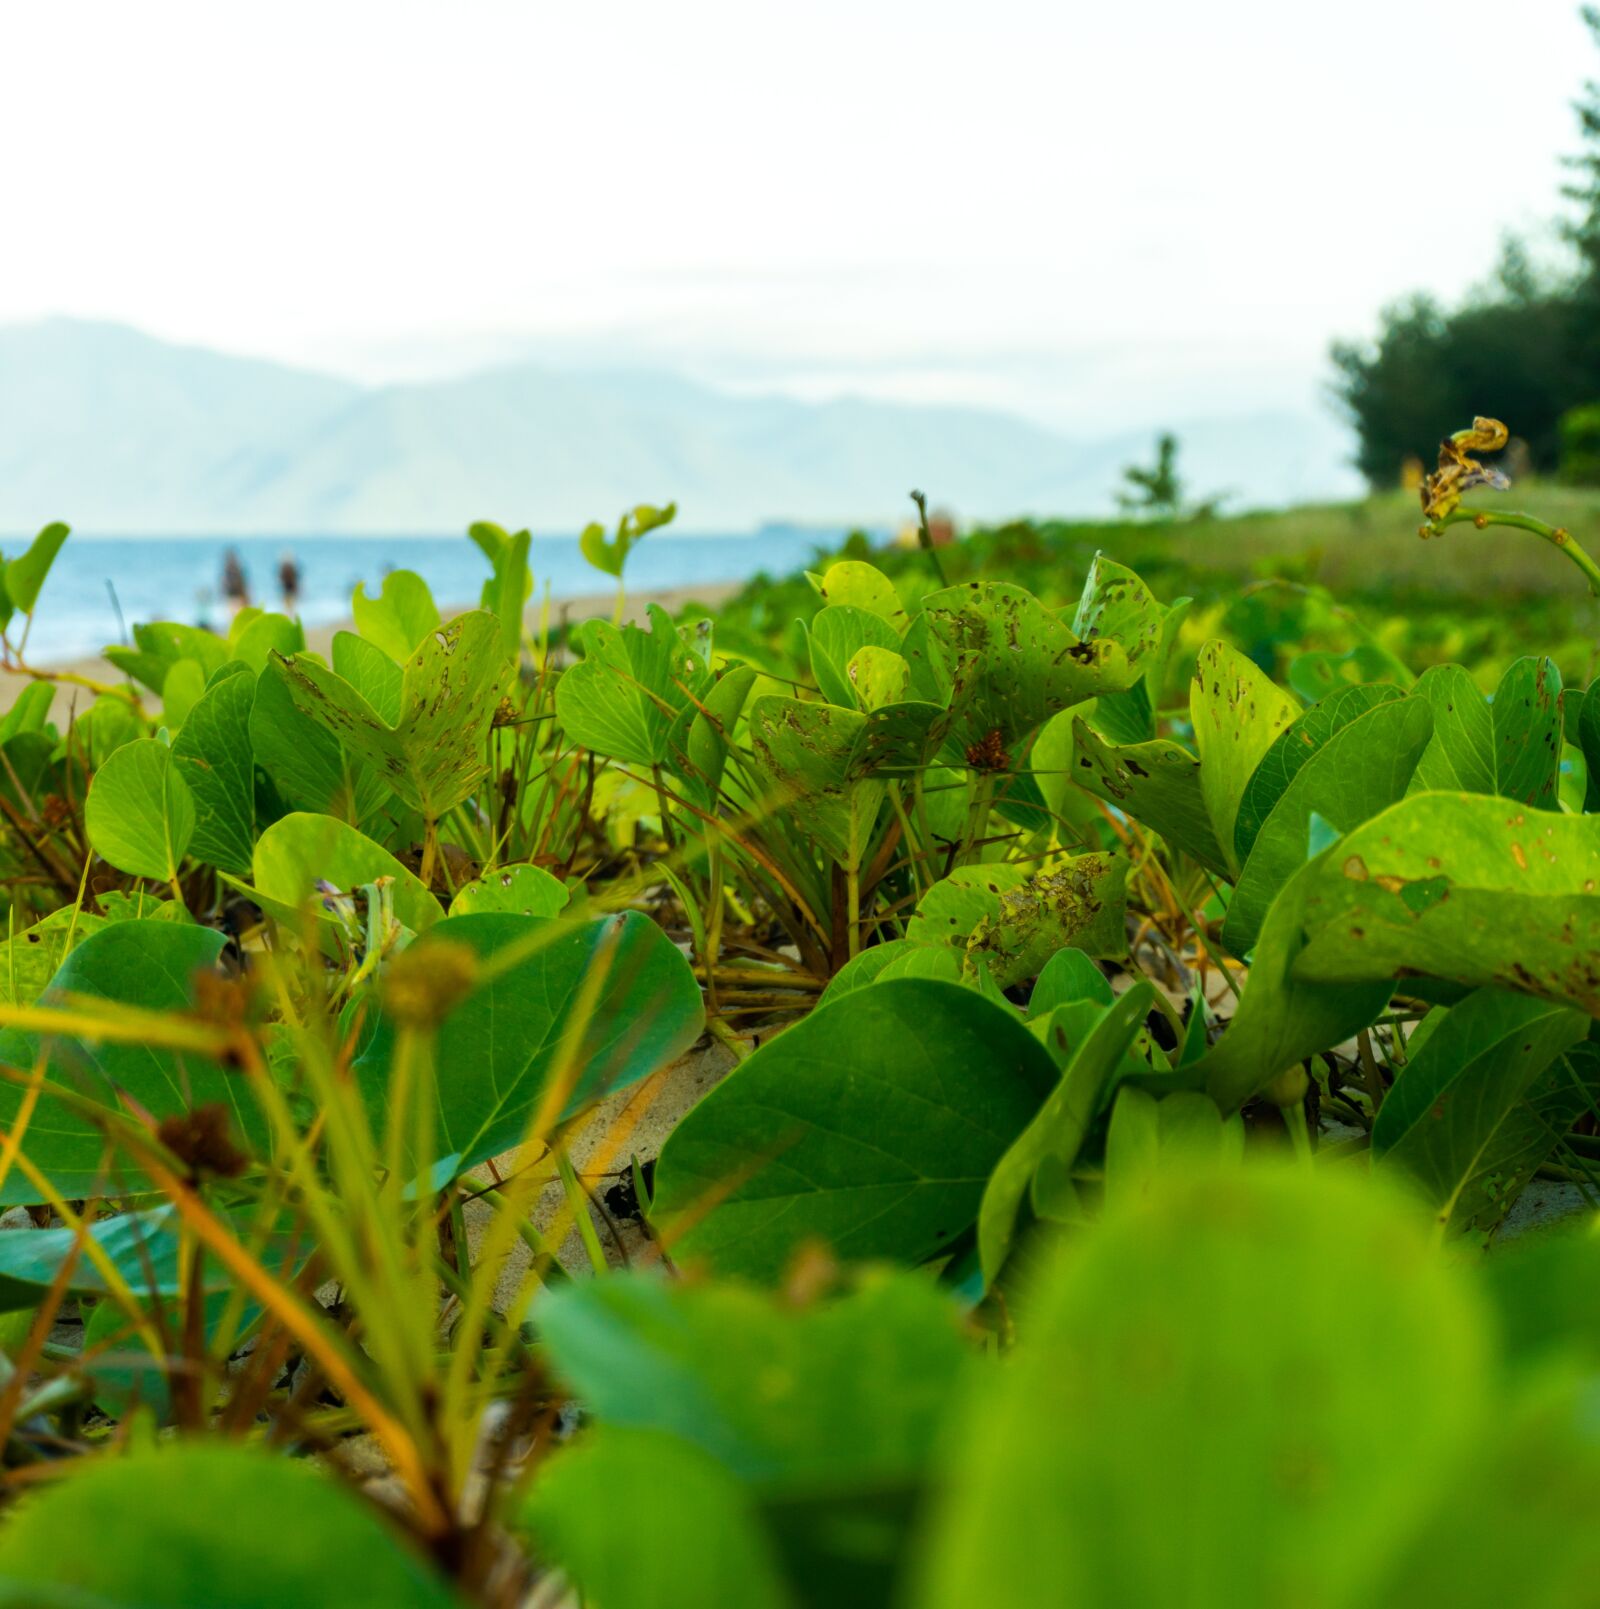 Sony a6000 sample photo. Leaves, beach, landscape photography